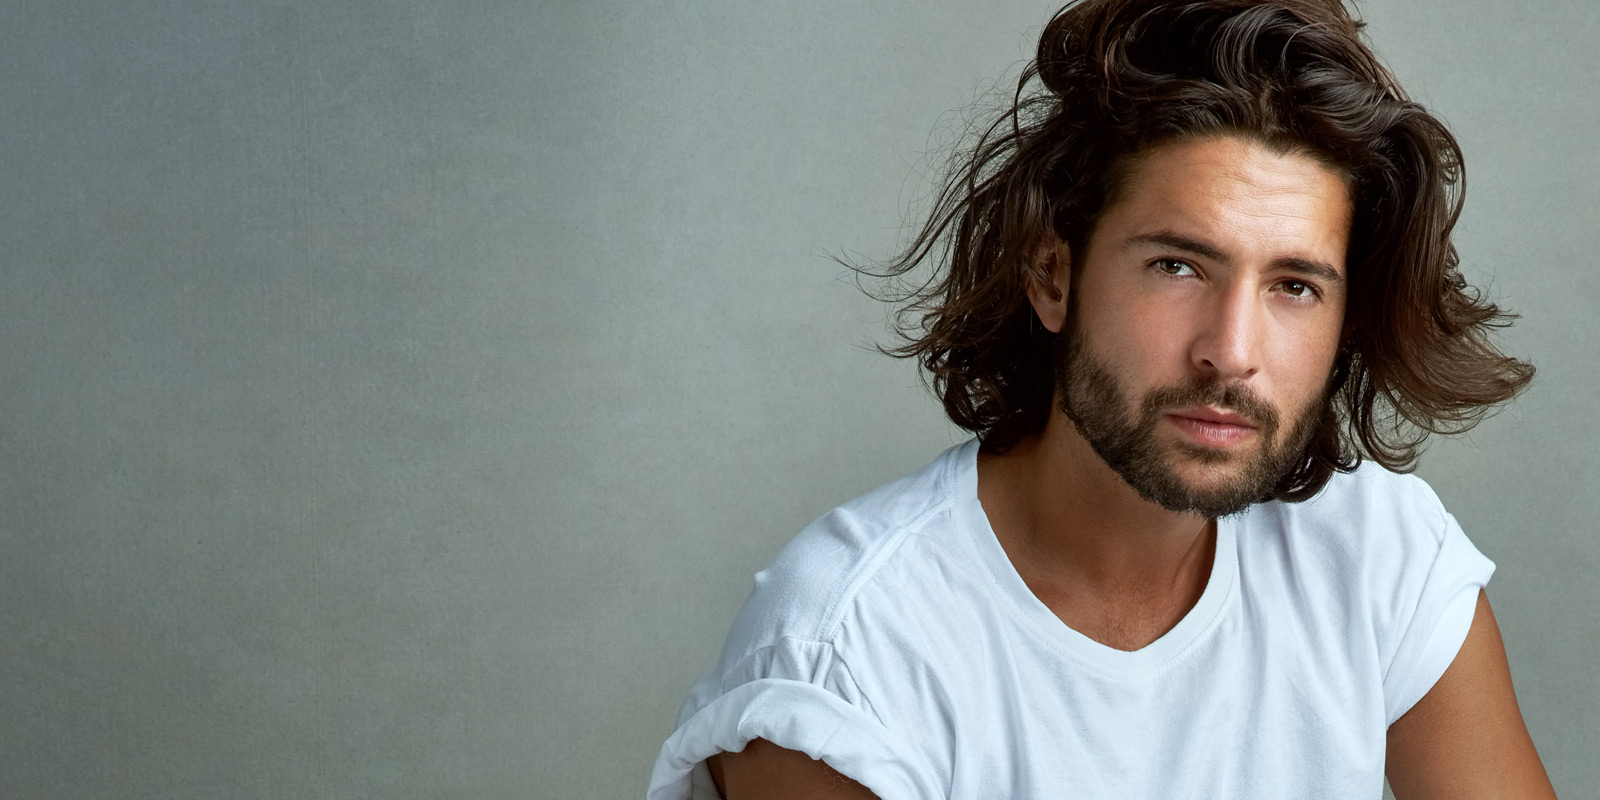 Discover the Best Long Hairstyles for Men | Braun UK